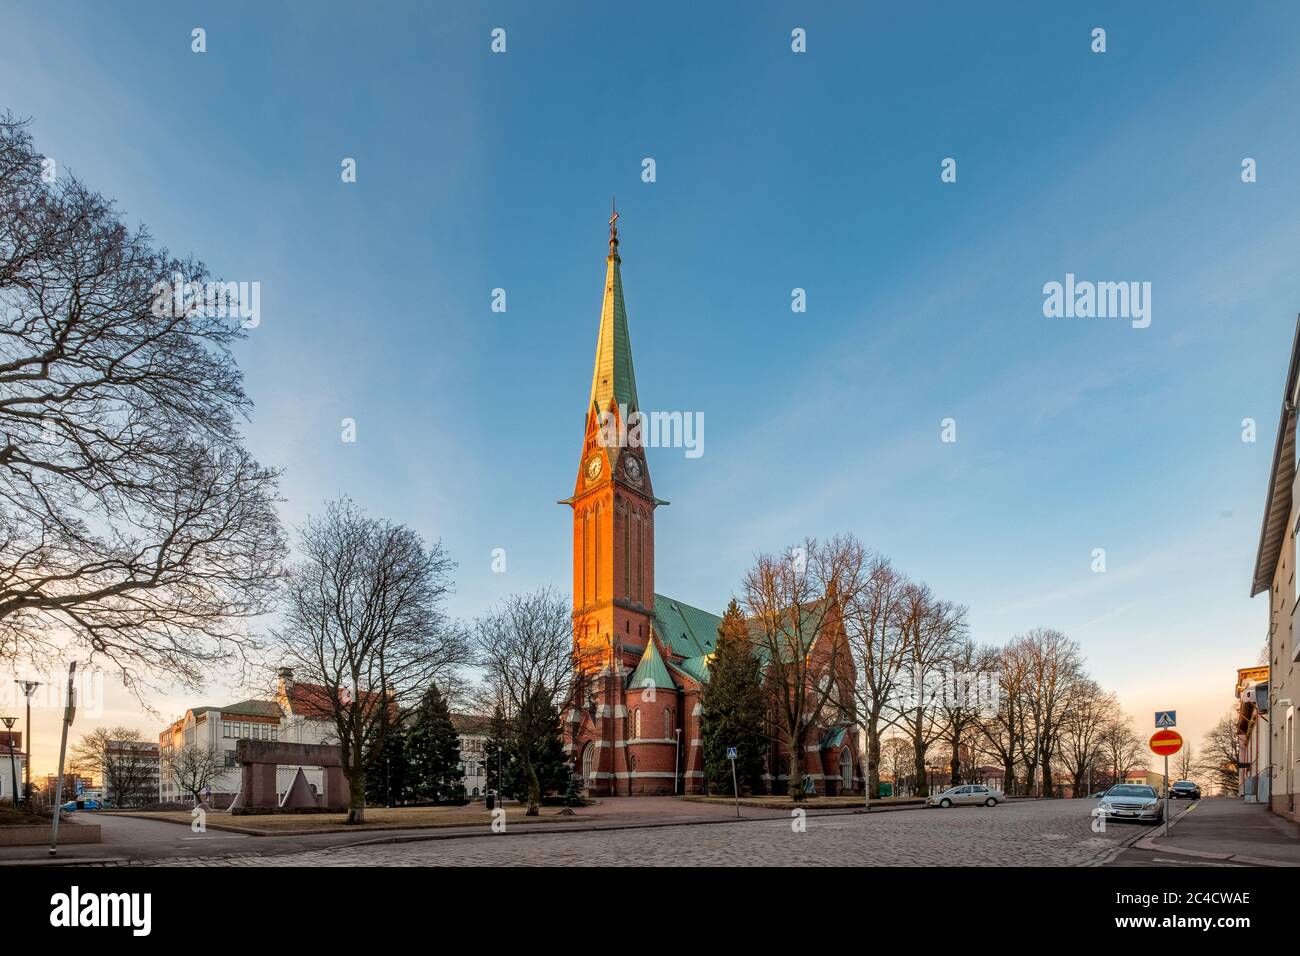 Kotka Lutheran Church, Finland. The neo-gothic building of a church. Morning cityscape in the city of Kotka in Finland. Stock Photo